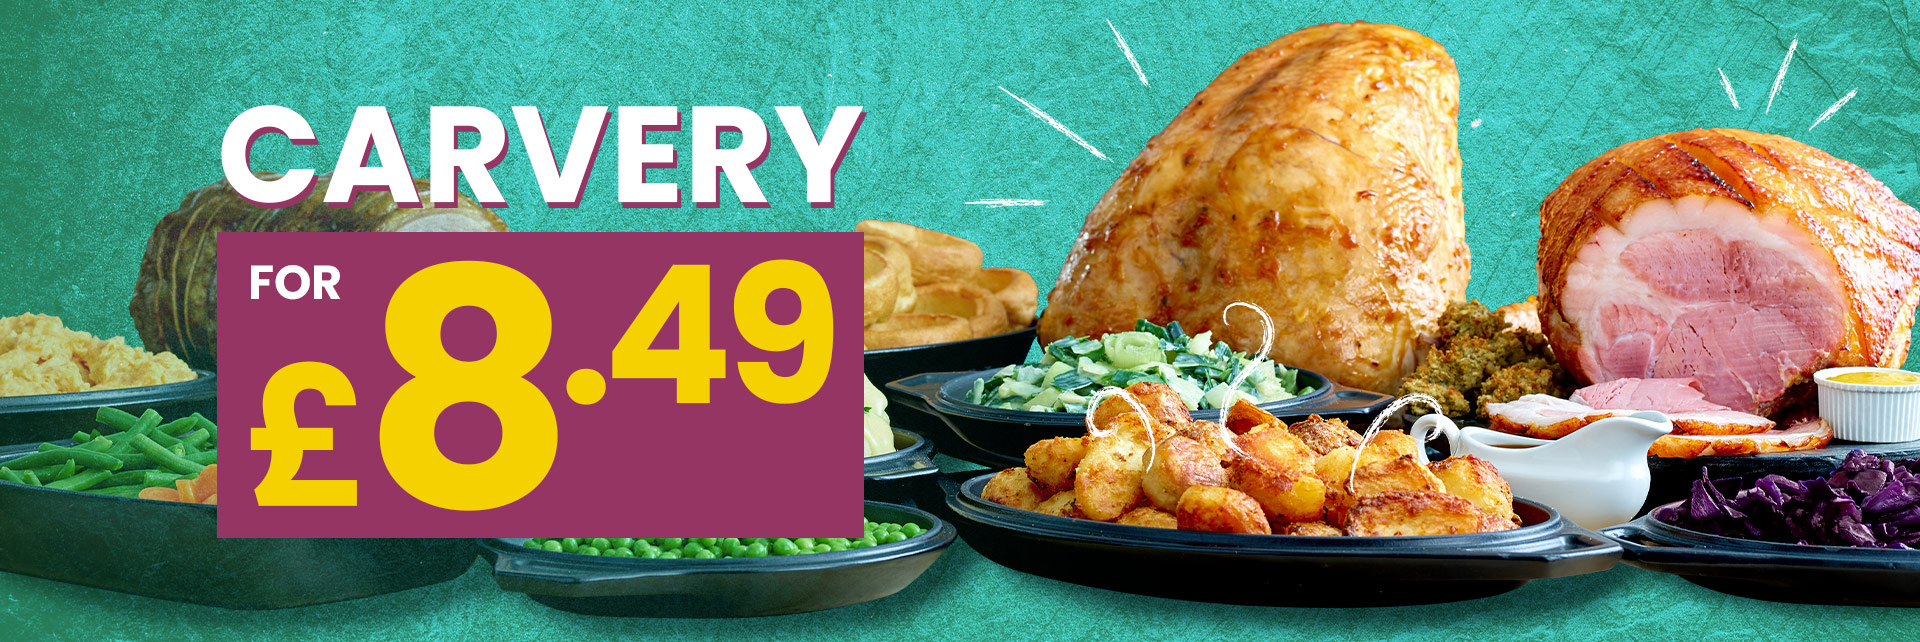 sizzling-offers-carvery-banner-8.49.jpg